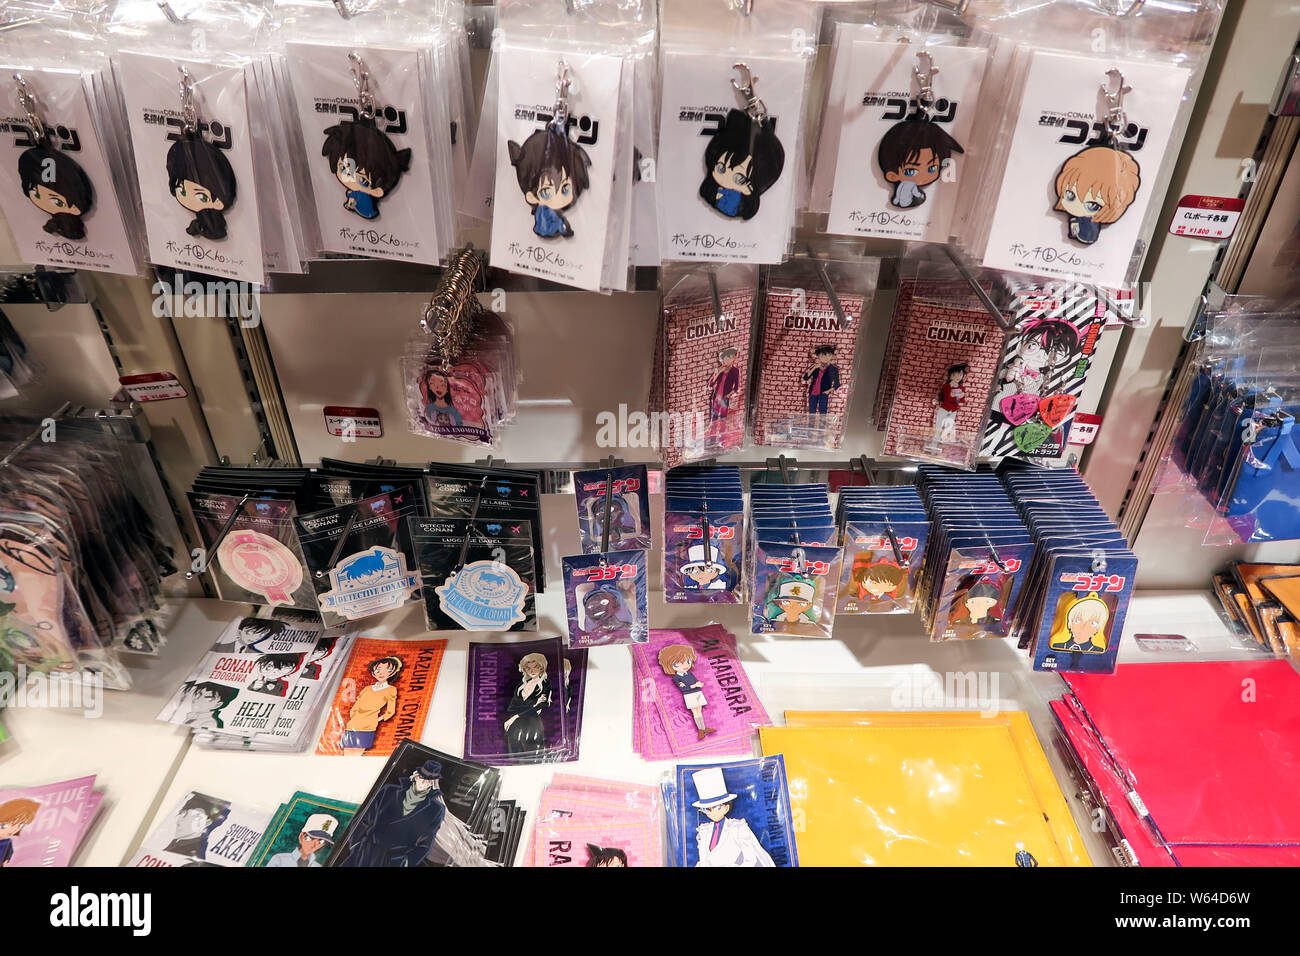 Exclusive merchandise of Japanese detective manga series "Detective Conan"  are on display during the Detective Conan exhibition at the Fukuoka Parco i  Stock Photo - Alamy